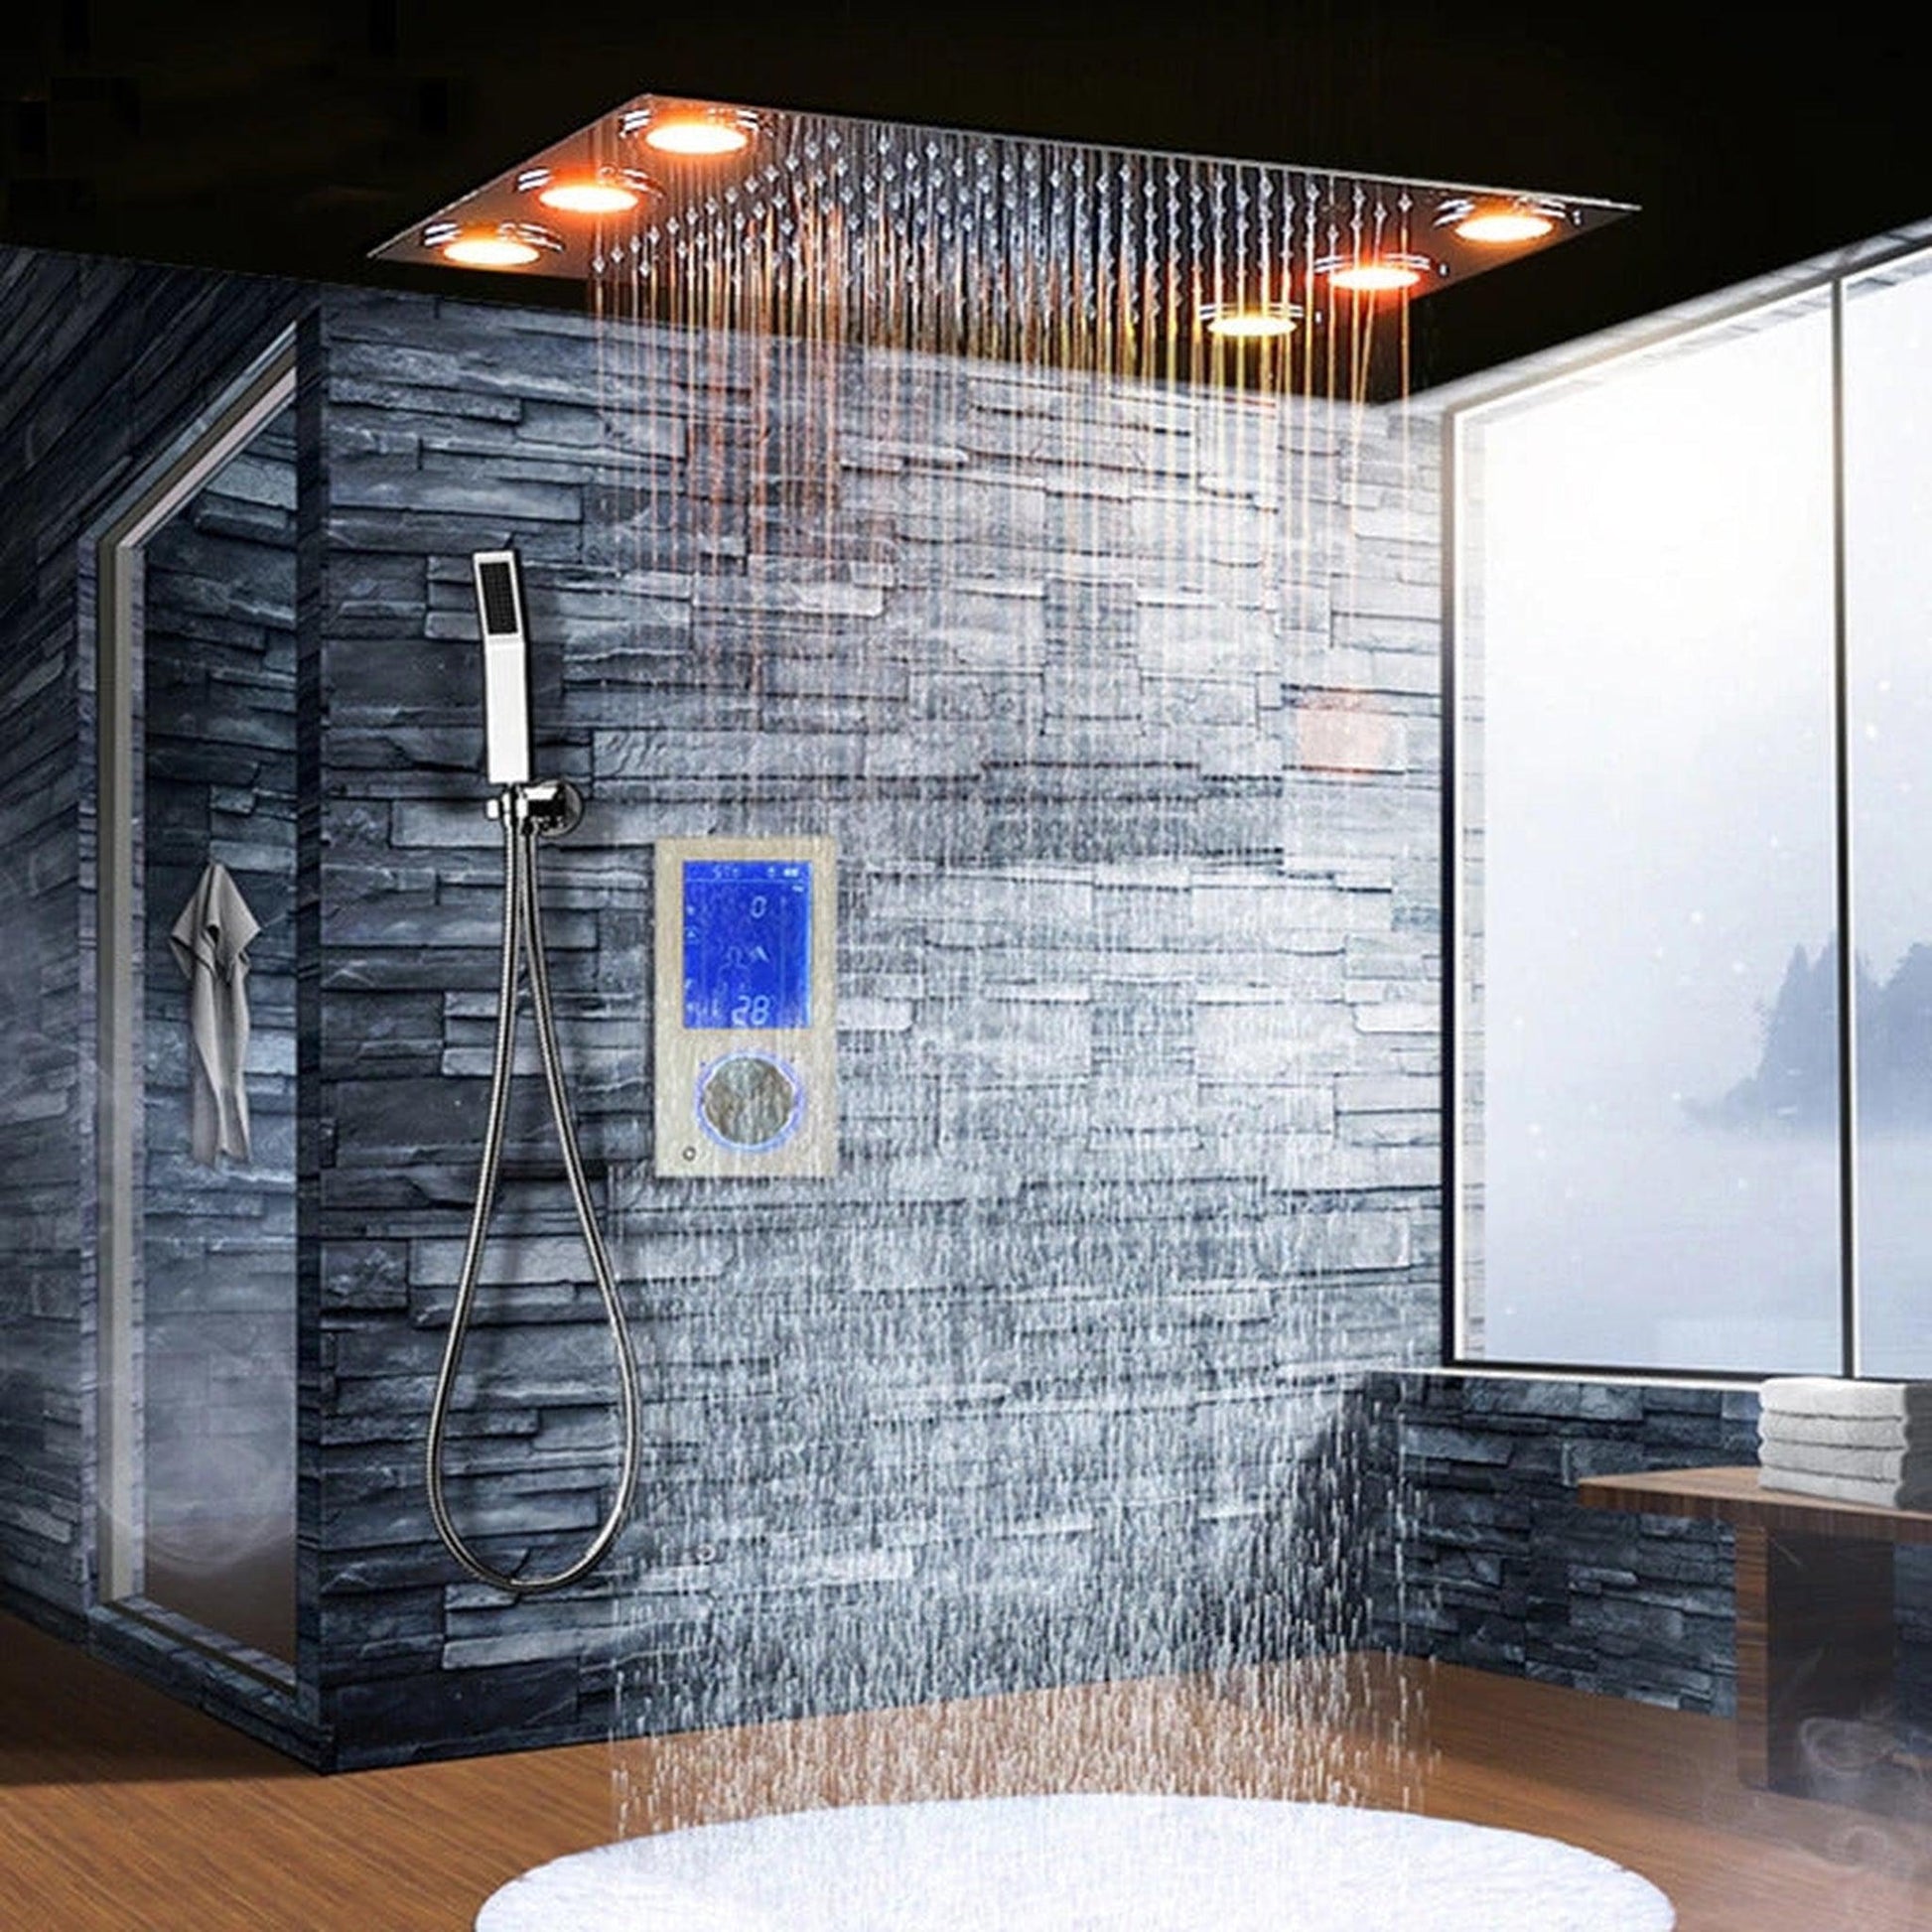 Fontana Dijon Stainless Steel Ceiling Mounted Modern LED Thermostatic Digital Touch Shower Controller Bathroom Shower System With Hand Shower